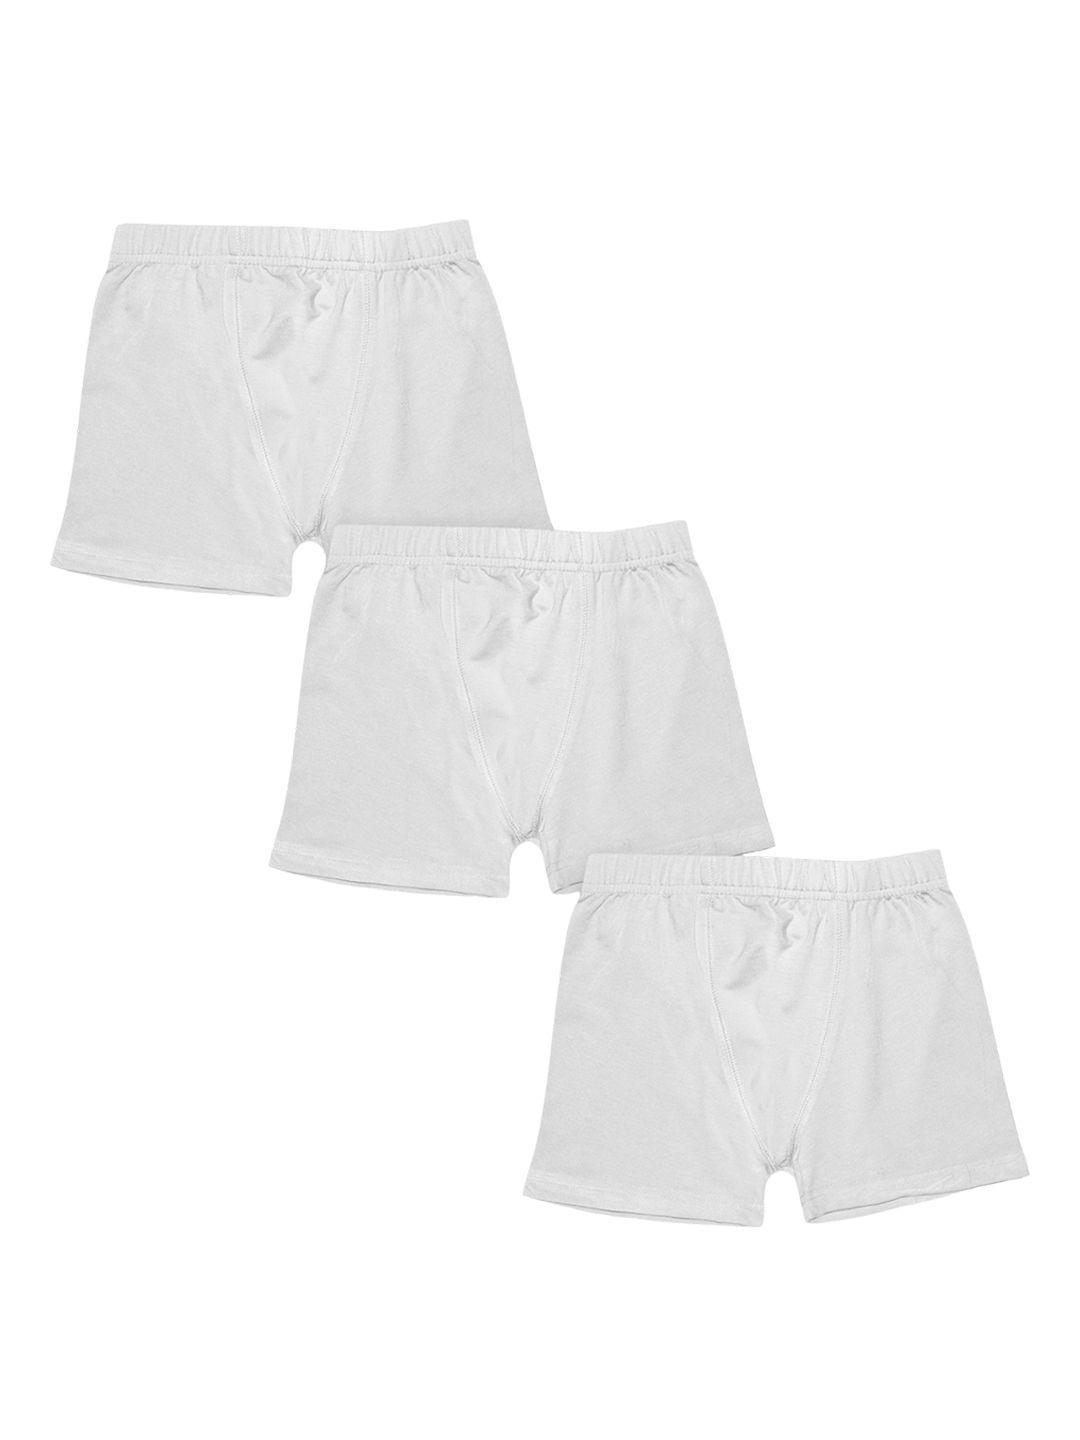 kiddopanti boys white pack of 3 solid boxers